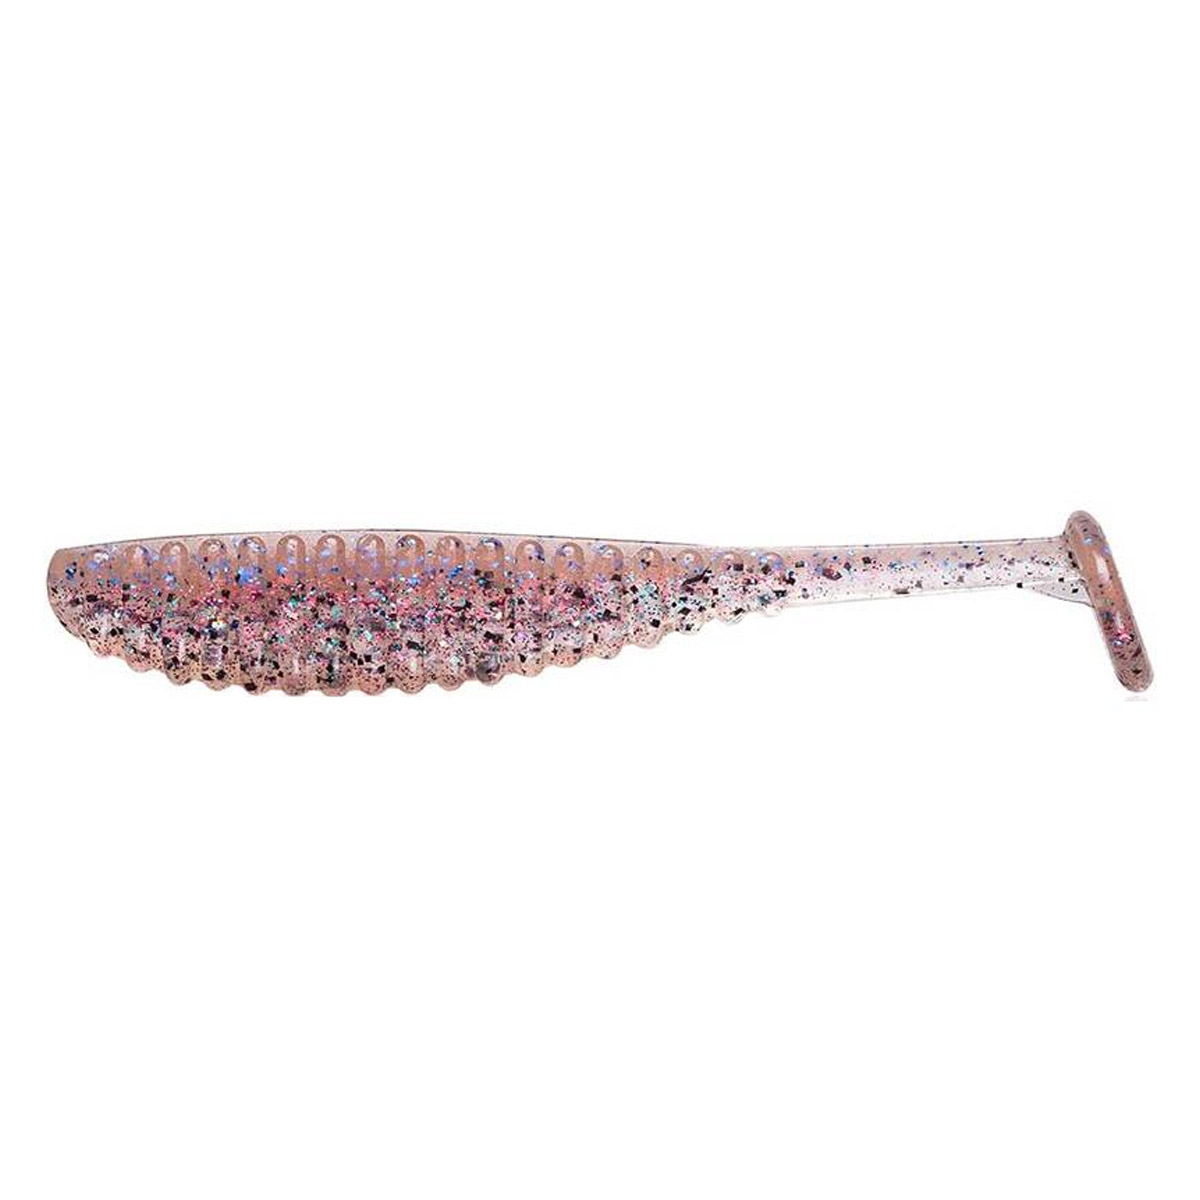 Reins S-Cape Shad 2.5 Inch -  North Lake Phase 1